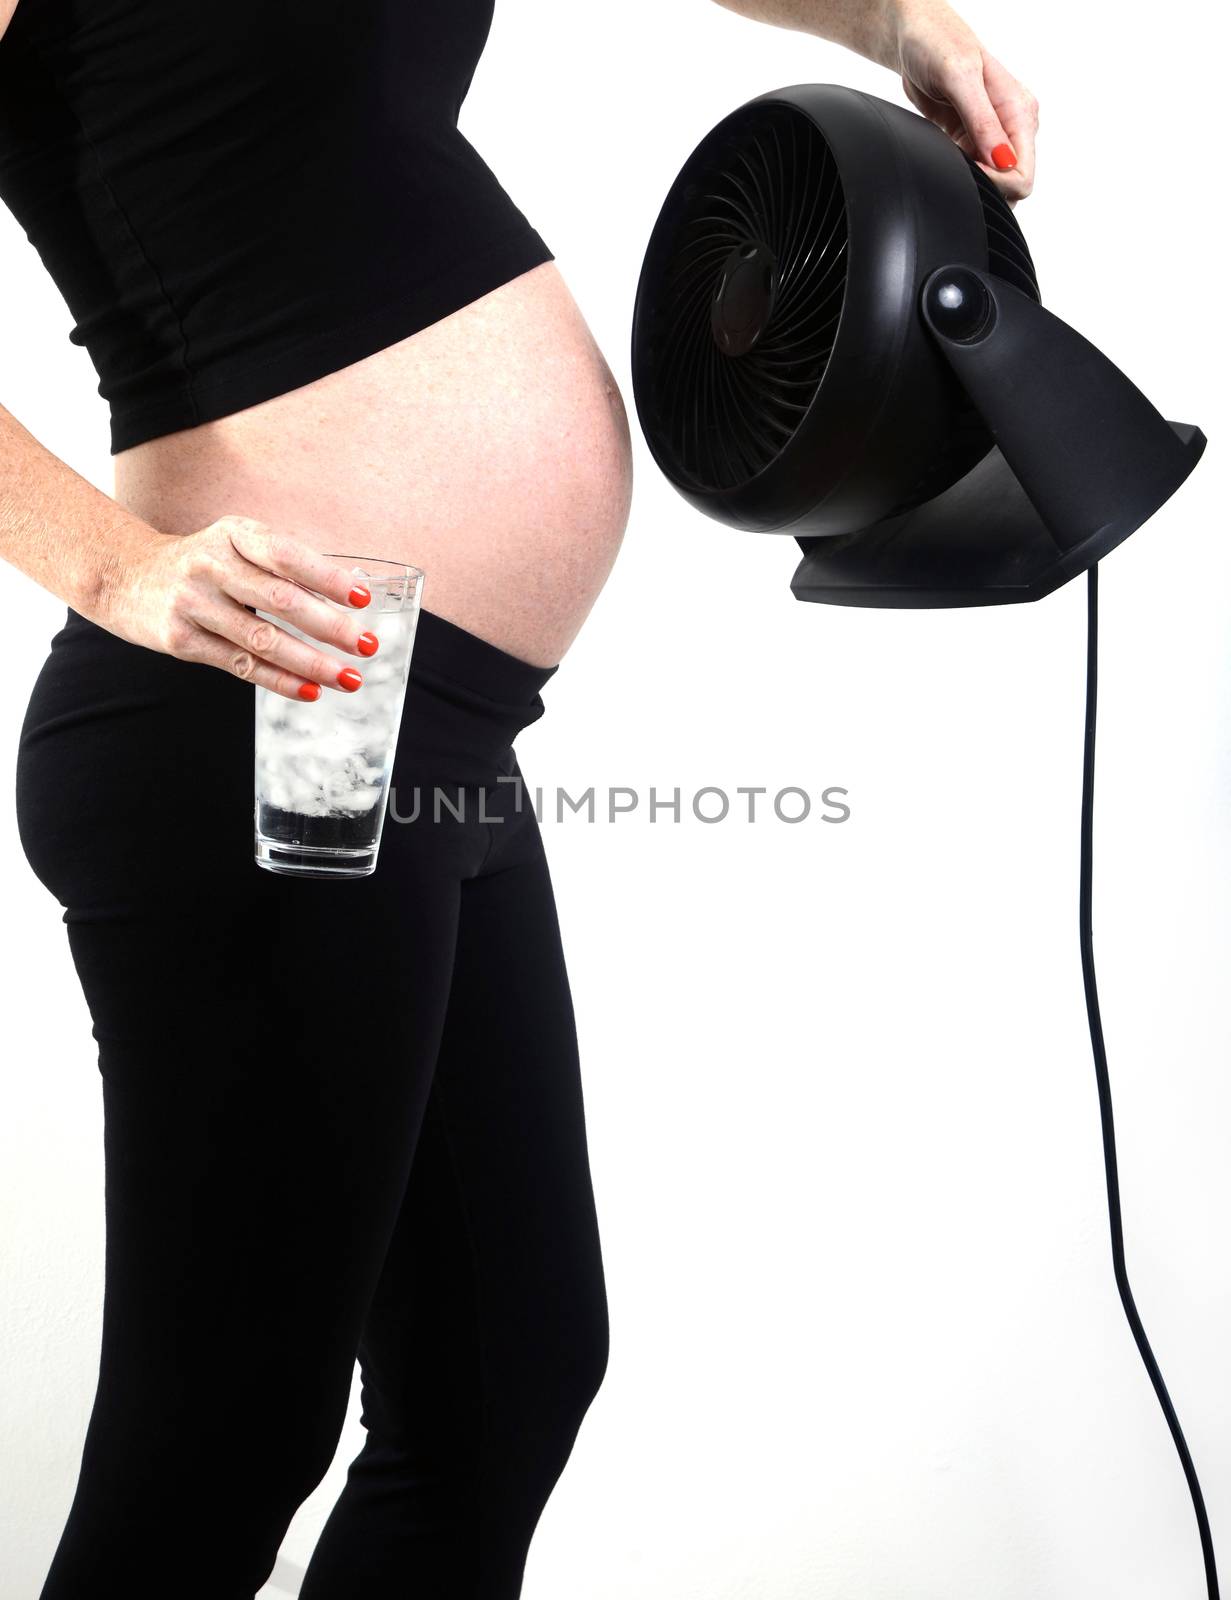 body temperature and hot flash during pregnancy by ftlaudgirl